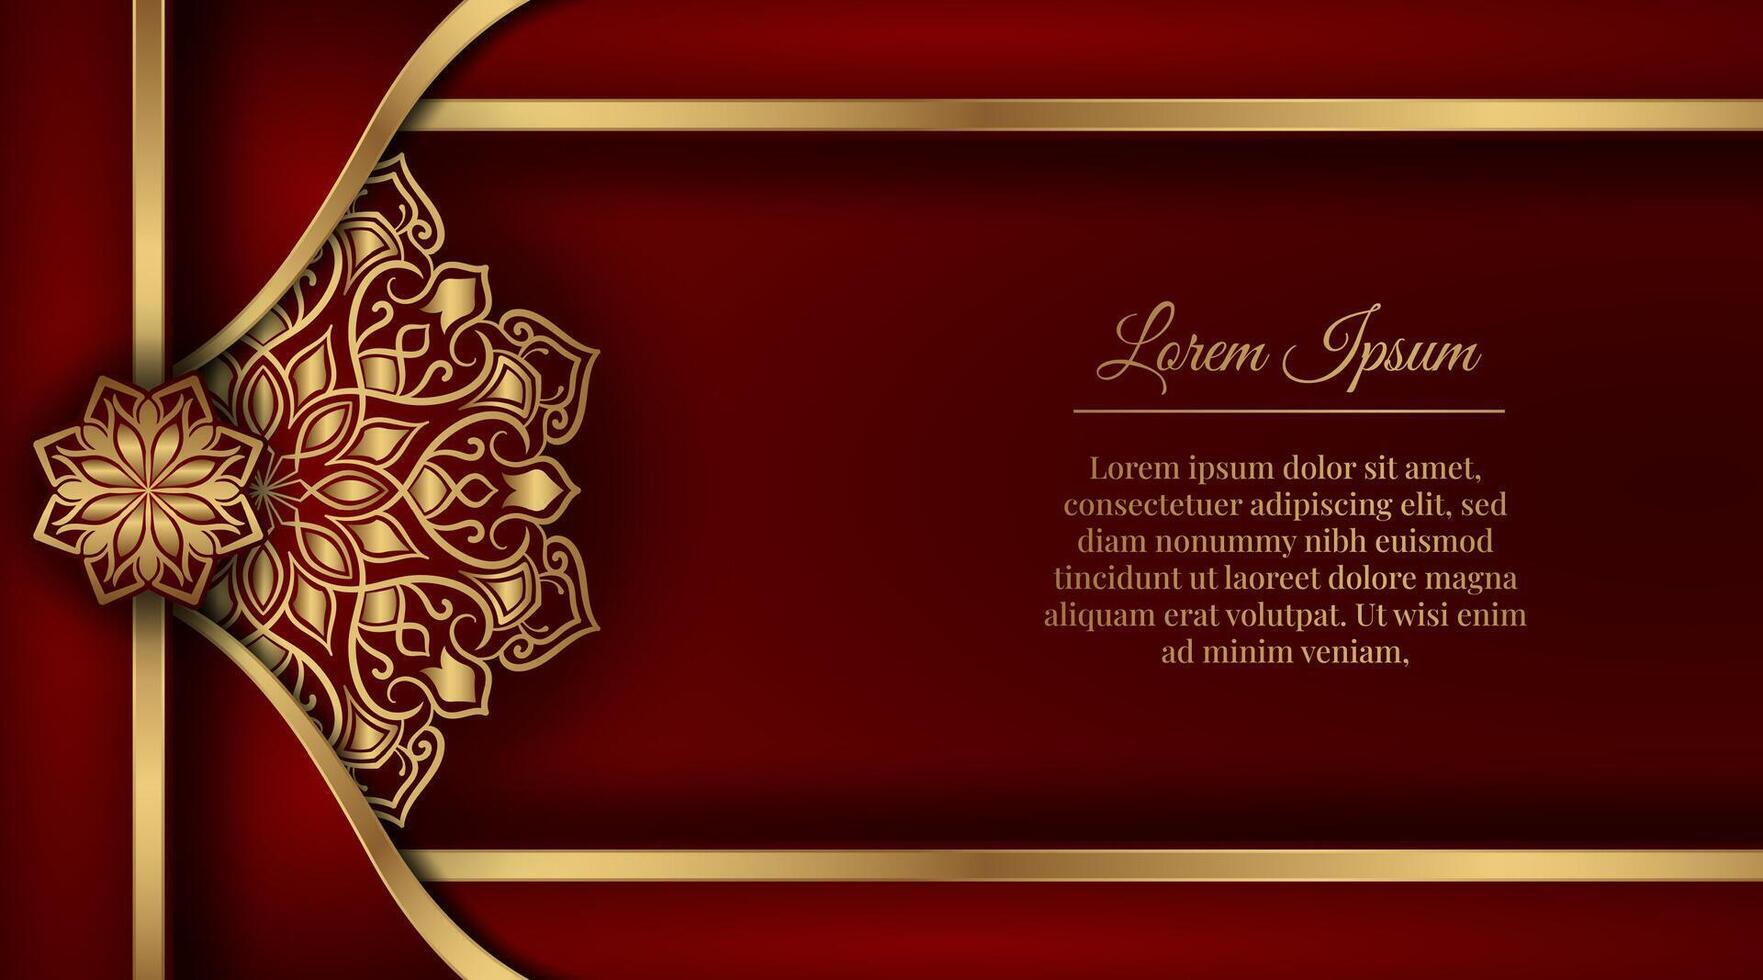 luxury mandala background, red and gold, design vector